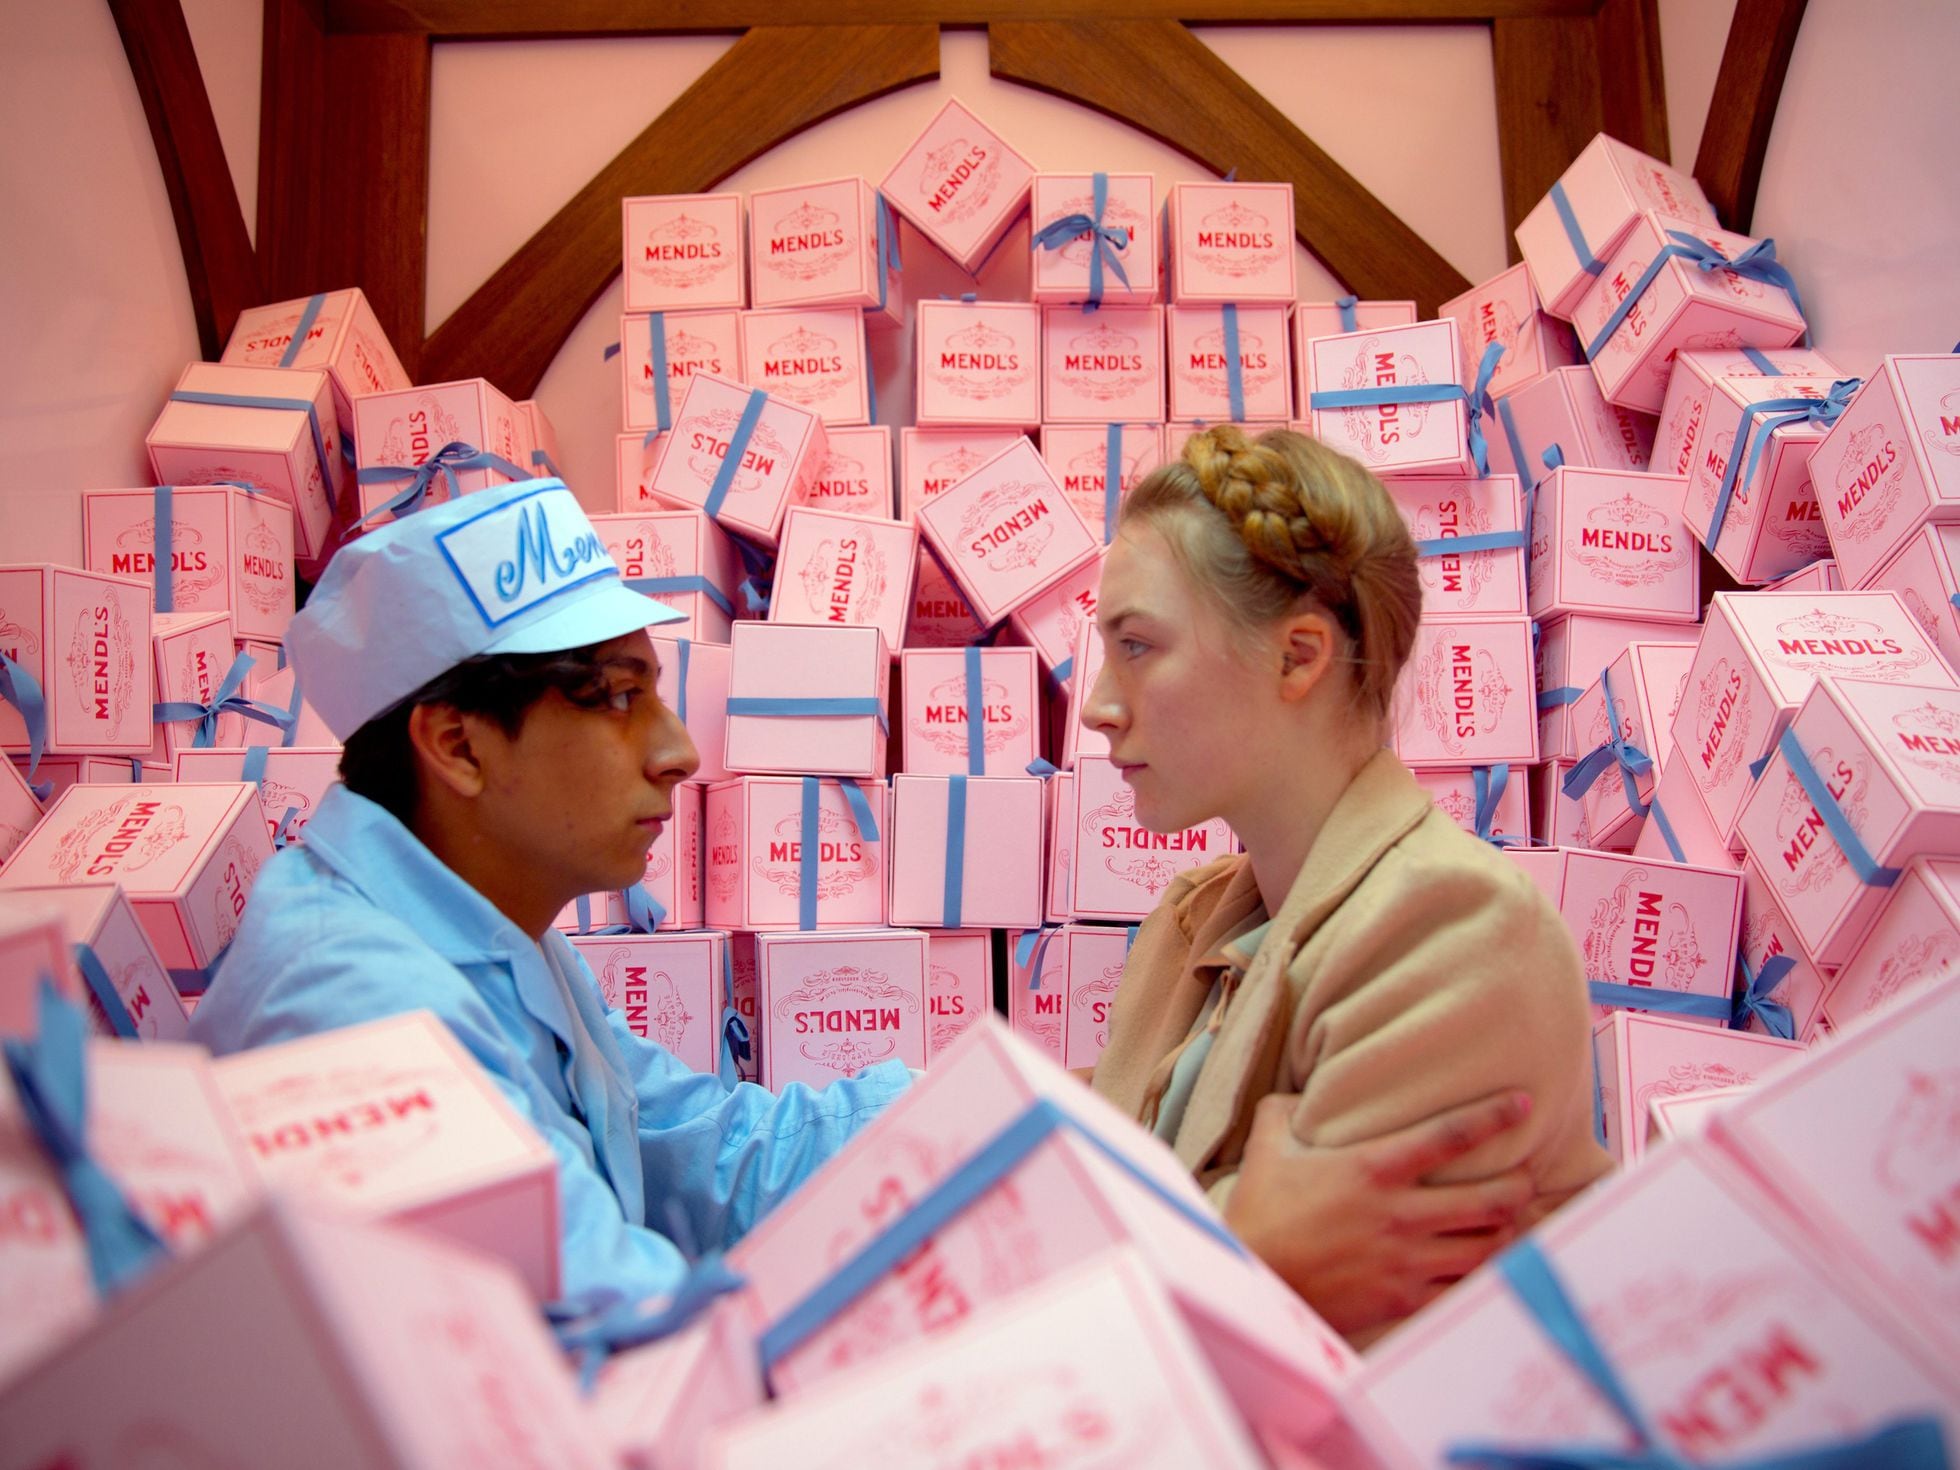 If I like Wes Anderson movies, what are some other movies I may